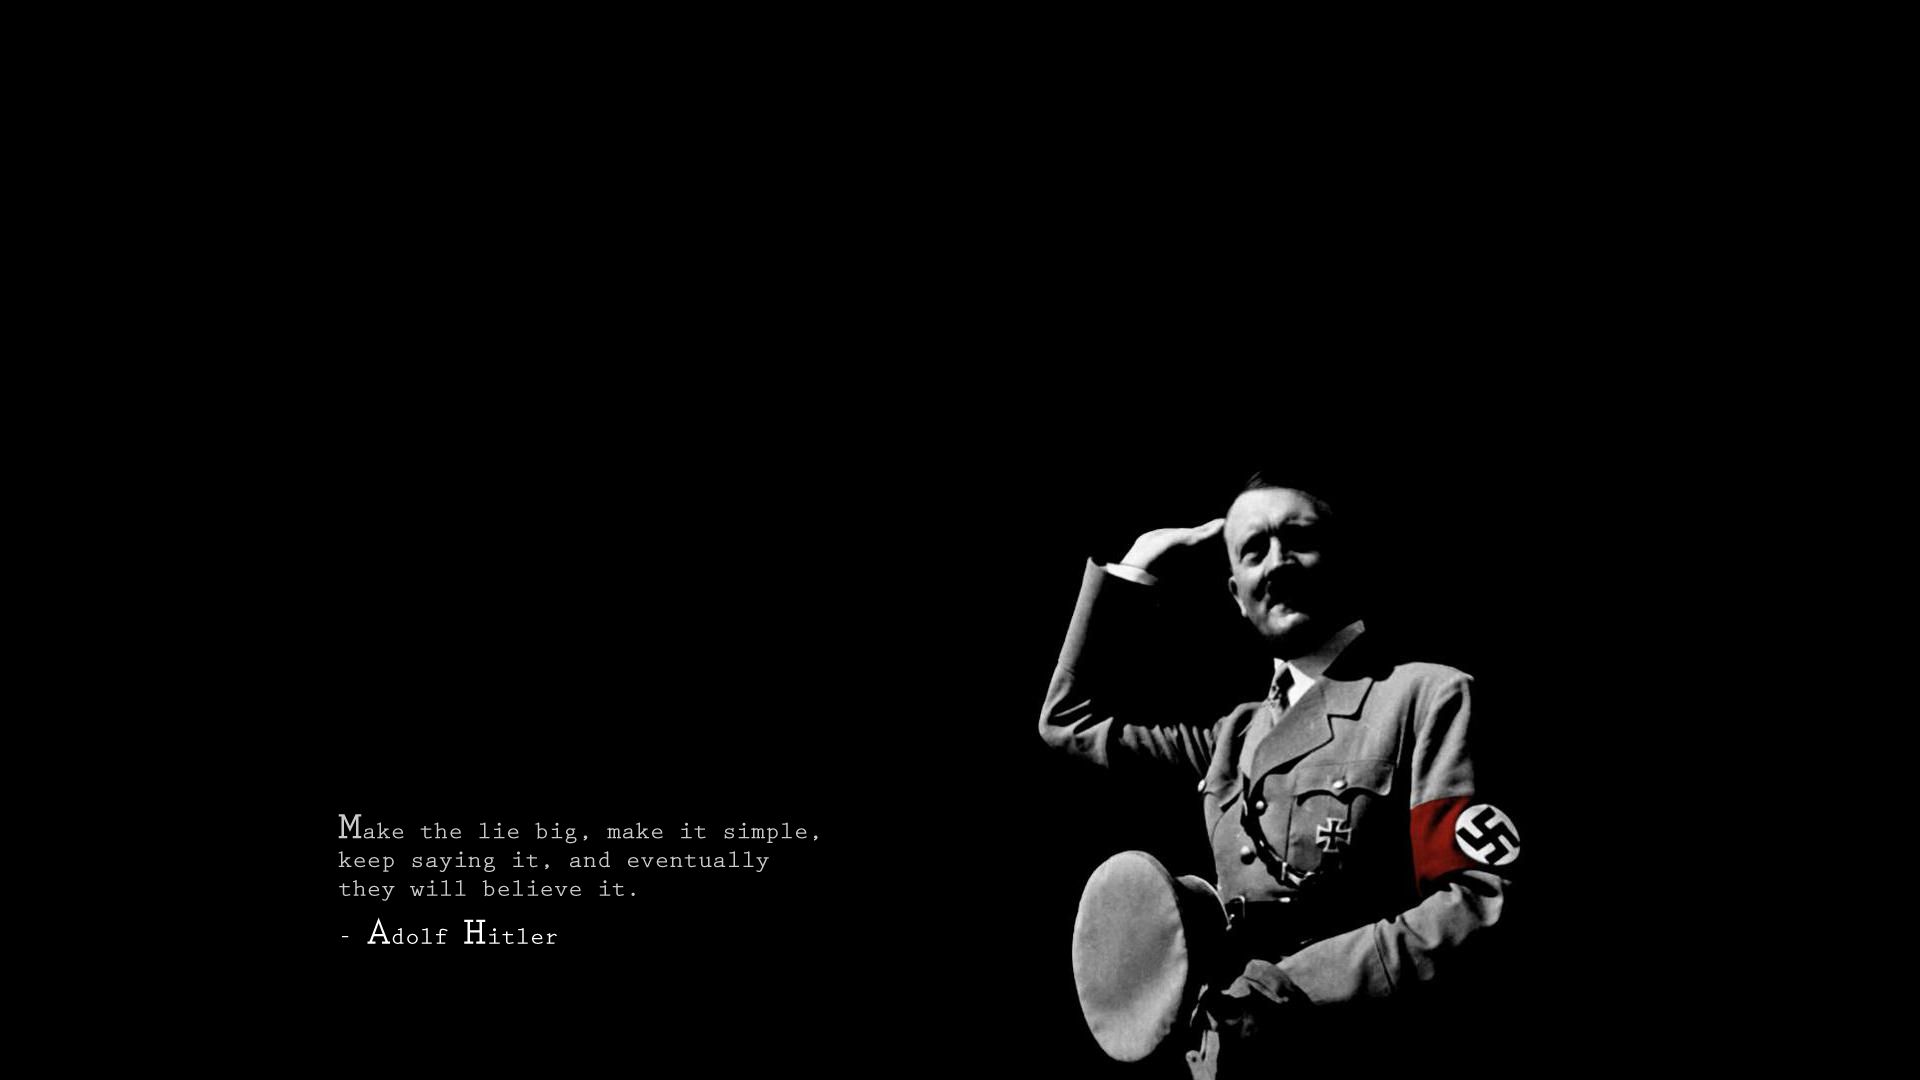 adolf hitler, quote, misc wallpapers for tablet